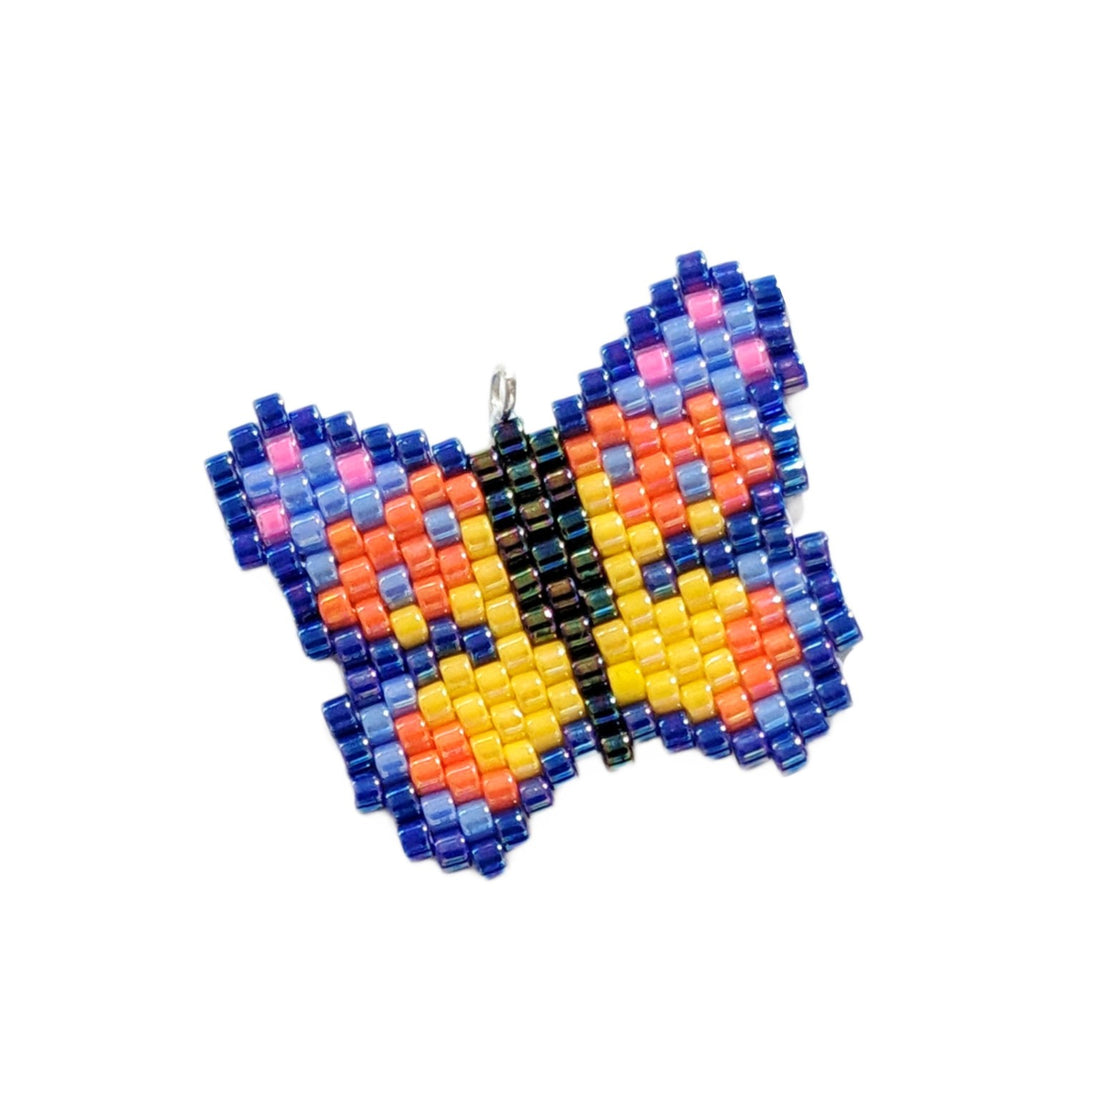 Brick Stitch Butterfly with Bead Crumbs!